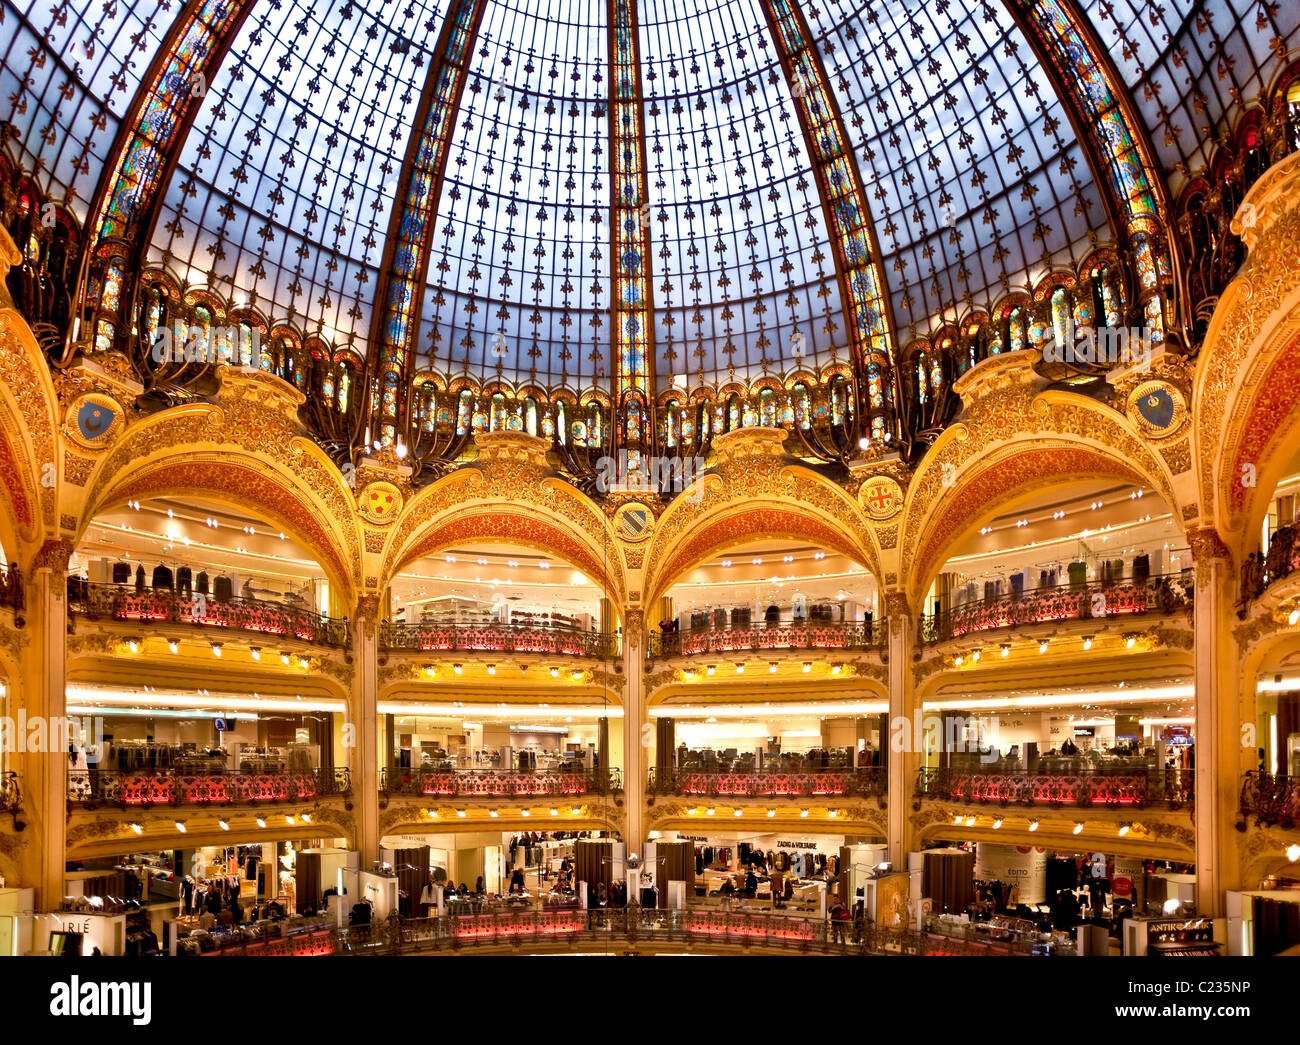 Galeries lafayettes hi-res stock photography and images - Alamy